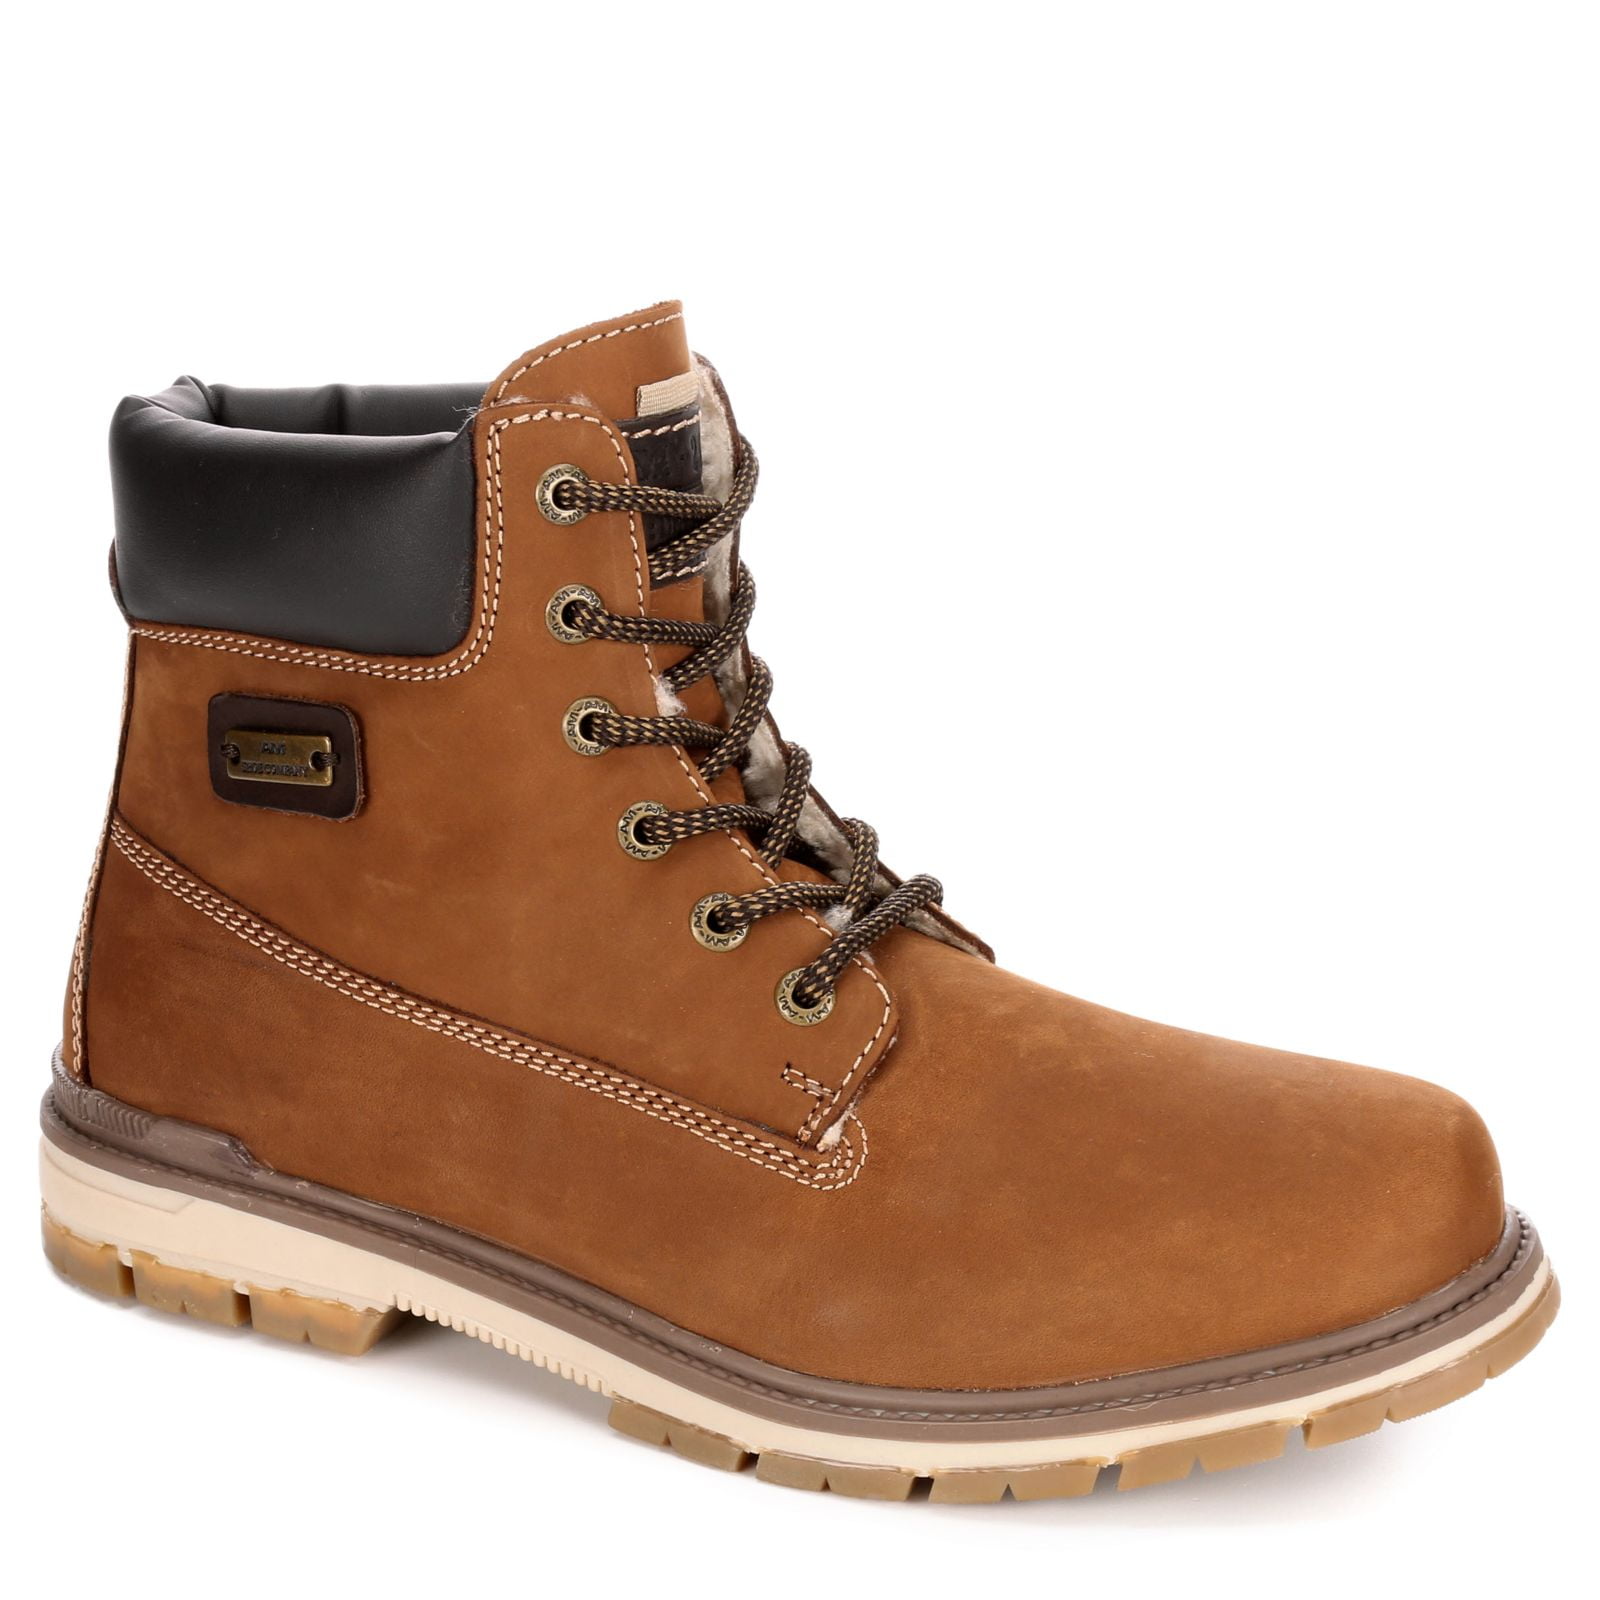 sewing machine jeans Unforeseen circumstances AM Shoes Mens Casual Lace Up Work Boot Shoes, Brown, US 11.5 - Walmart.com